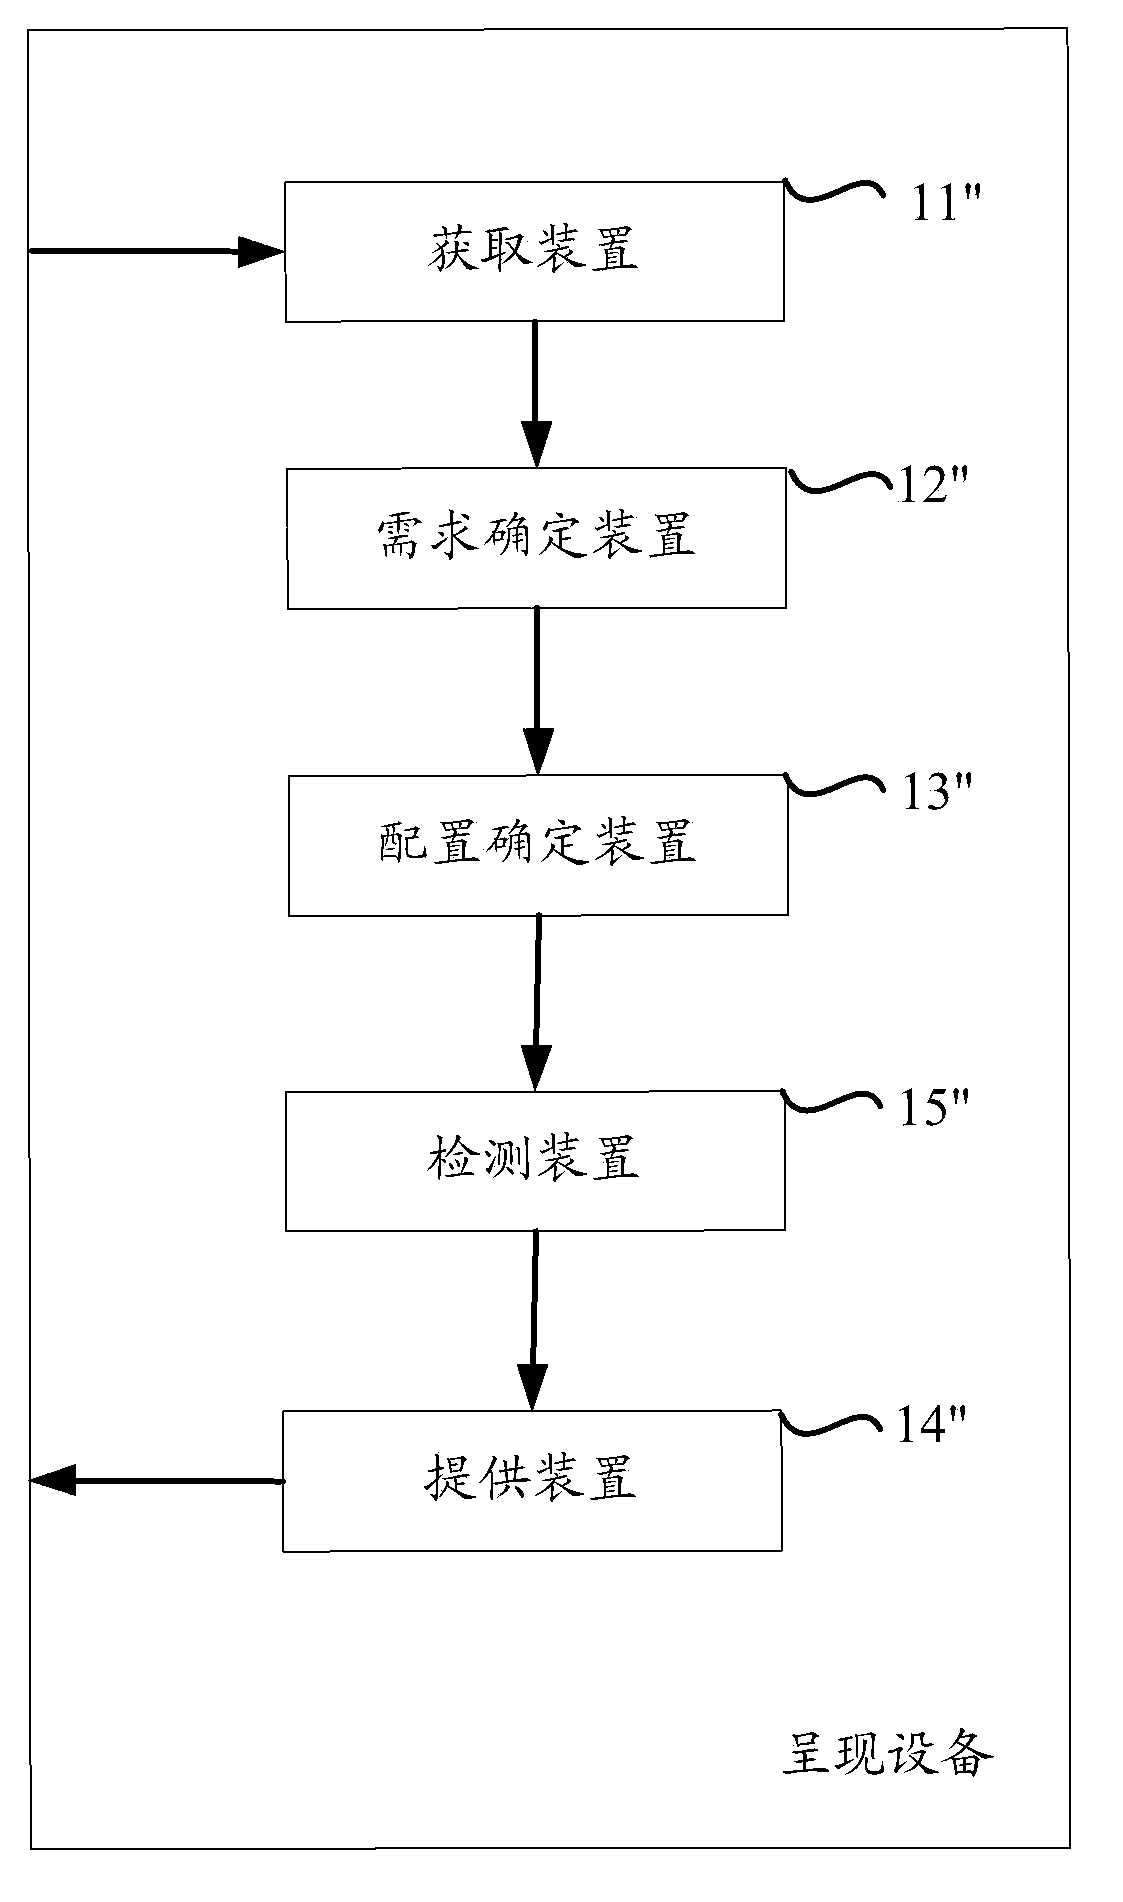 Method and equipment for supplying presenting information to user